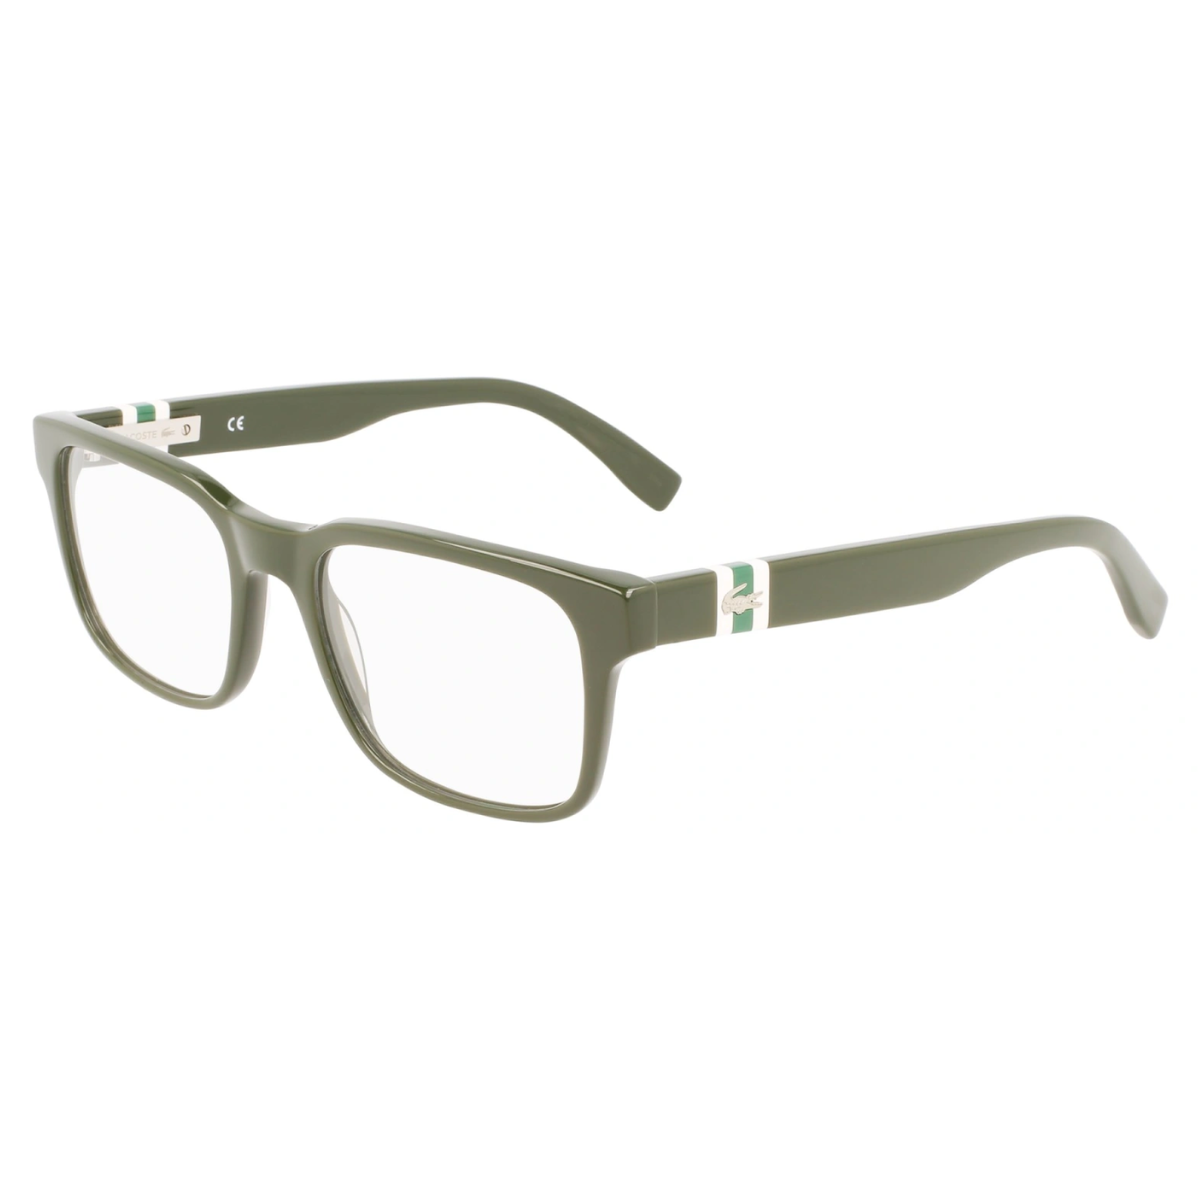 Lacoste 2905 Frame